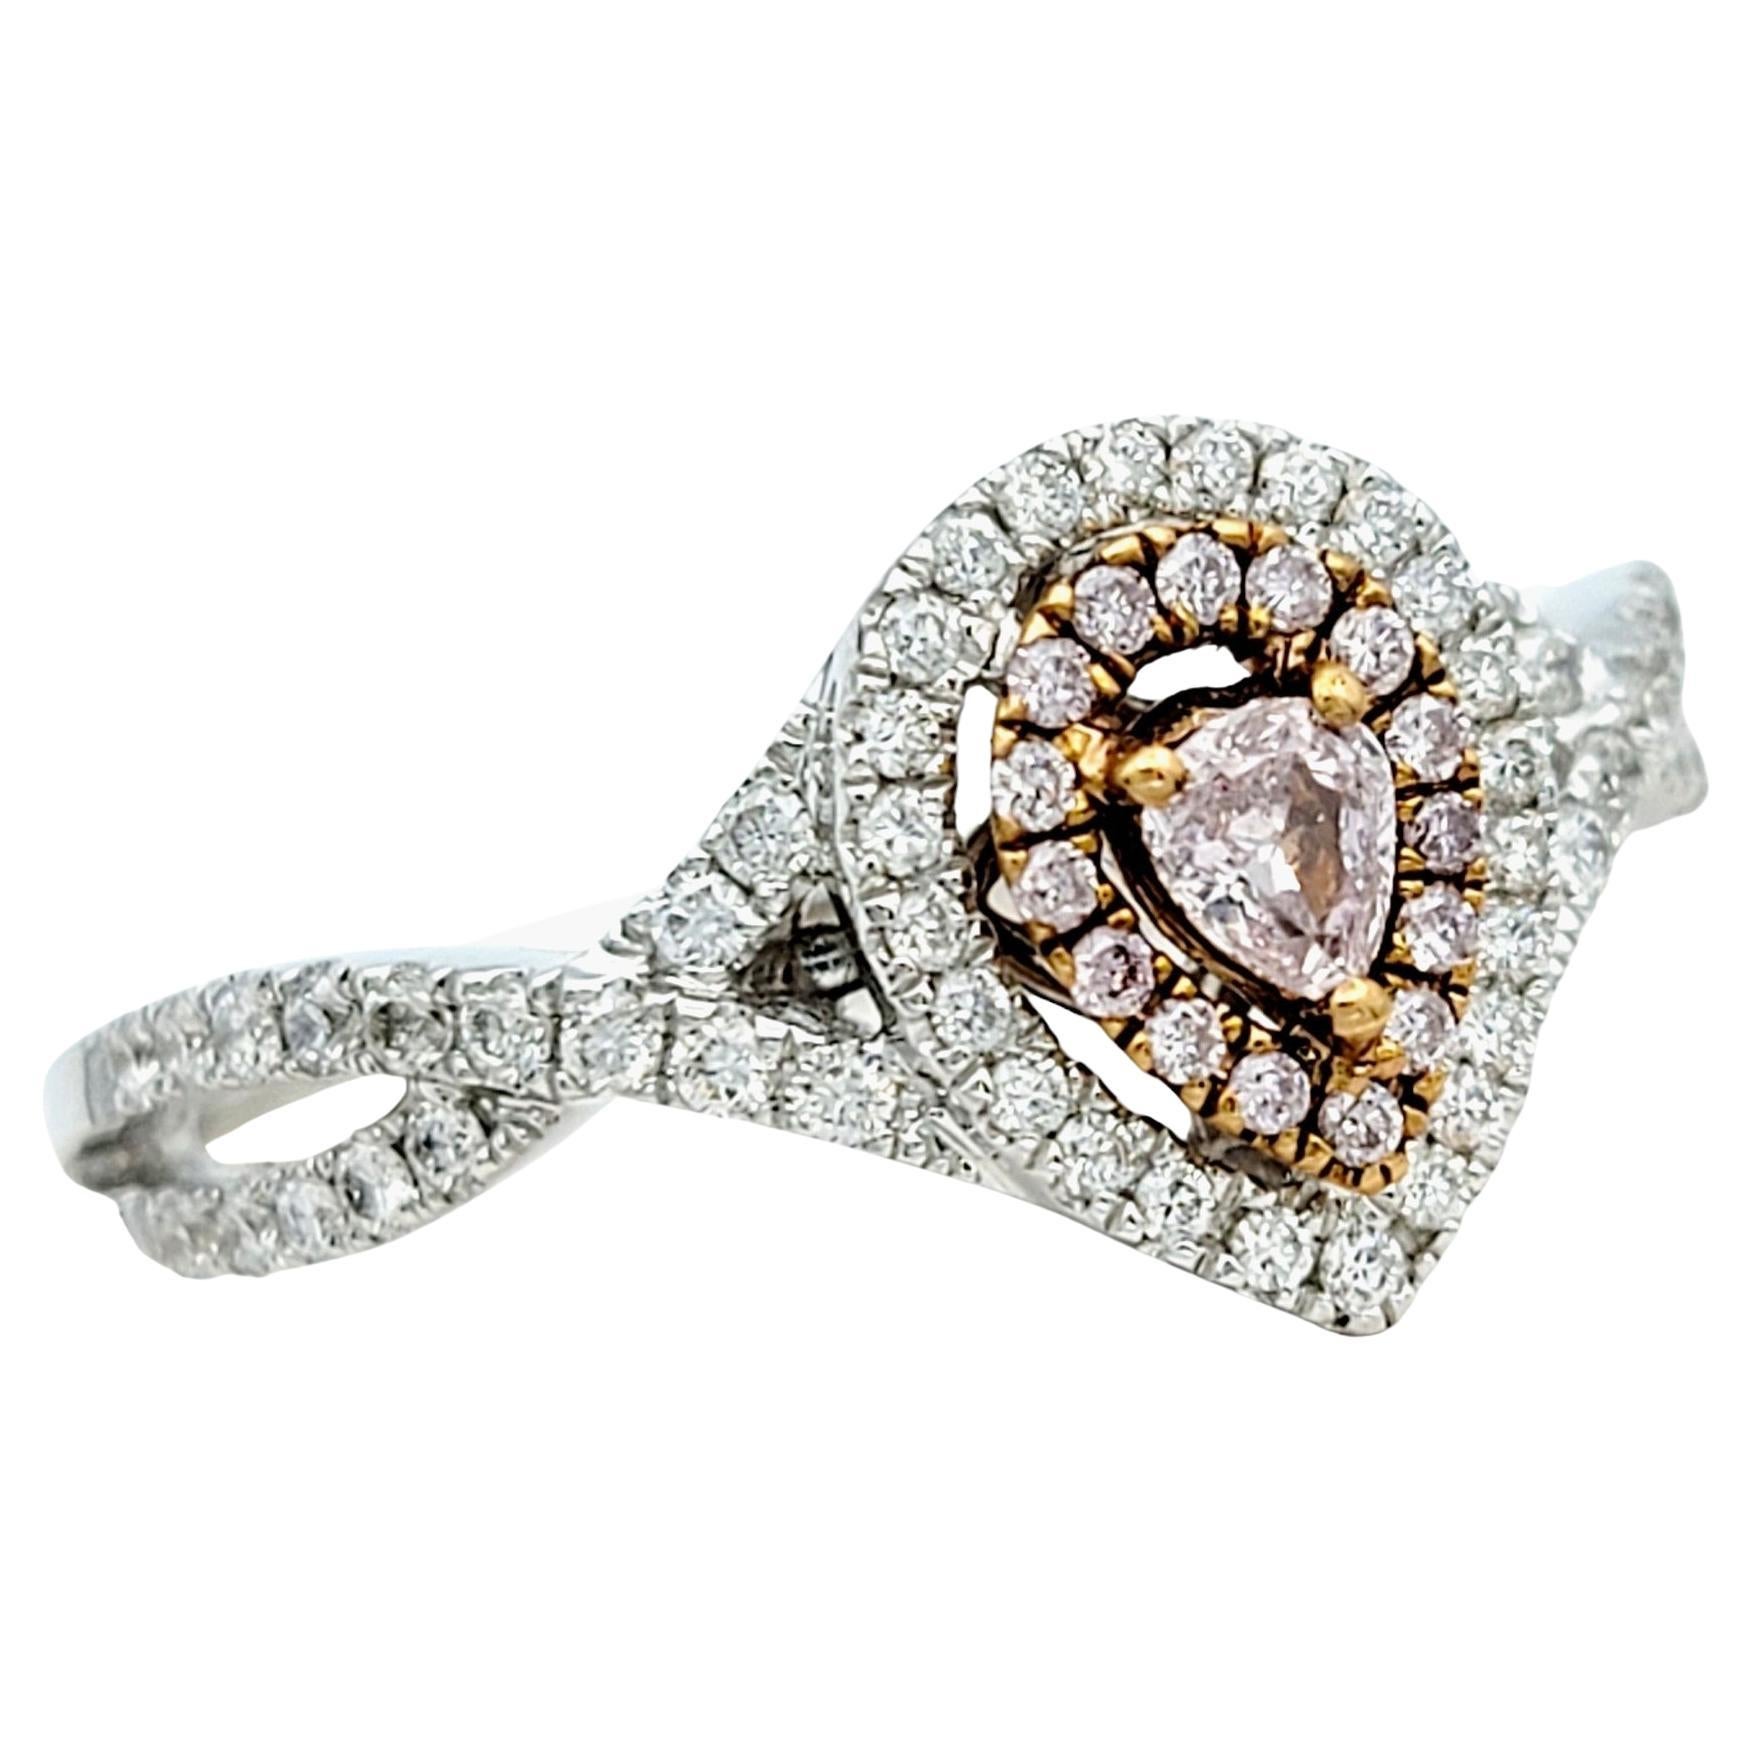 Ring Size: 7

This stunning diamond ring is crafted in lustrous 18 karat white gold, showcasing a captivating pink pear-cut diamond at its center, capturing elegance and femininity. Surrounding the exquisite centerpiece are not just one, but two